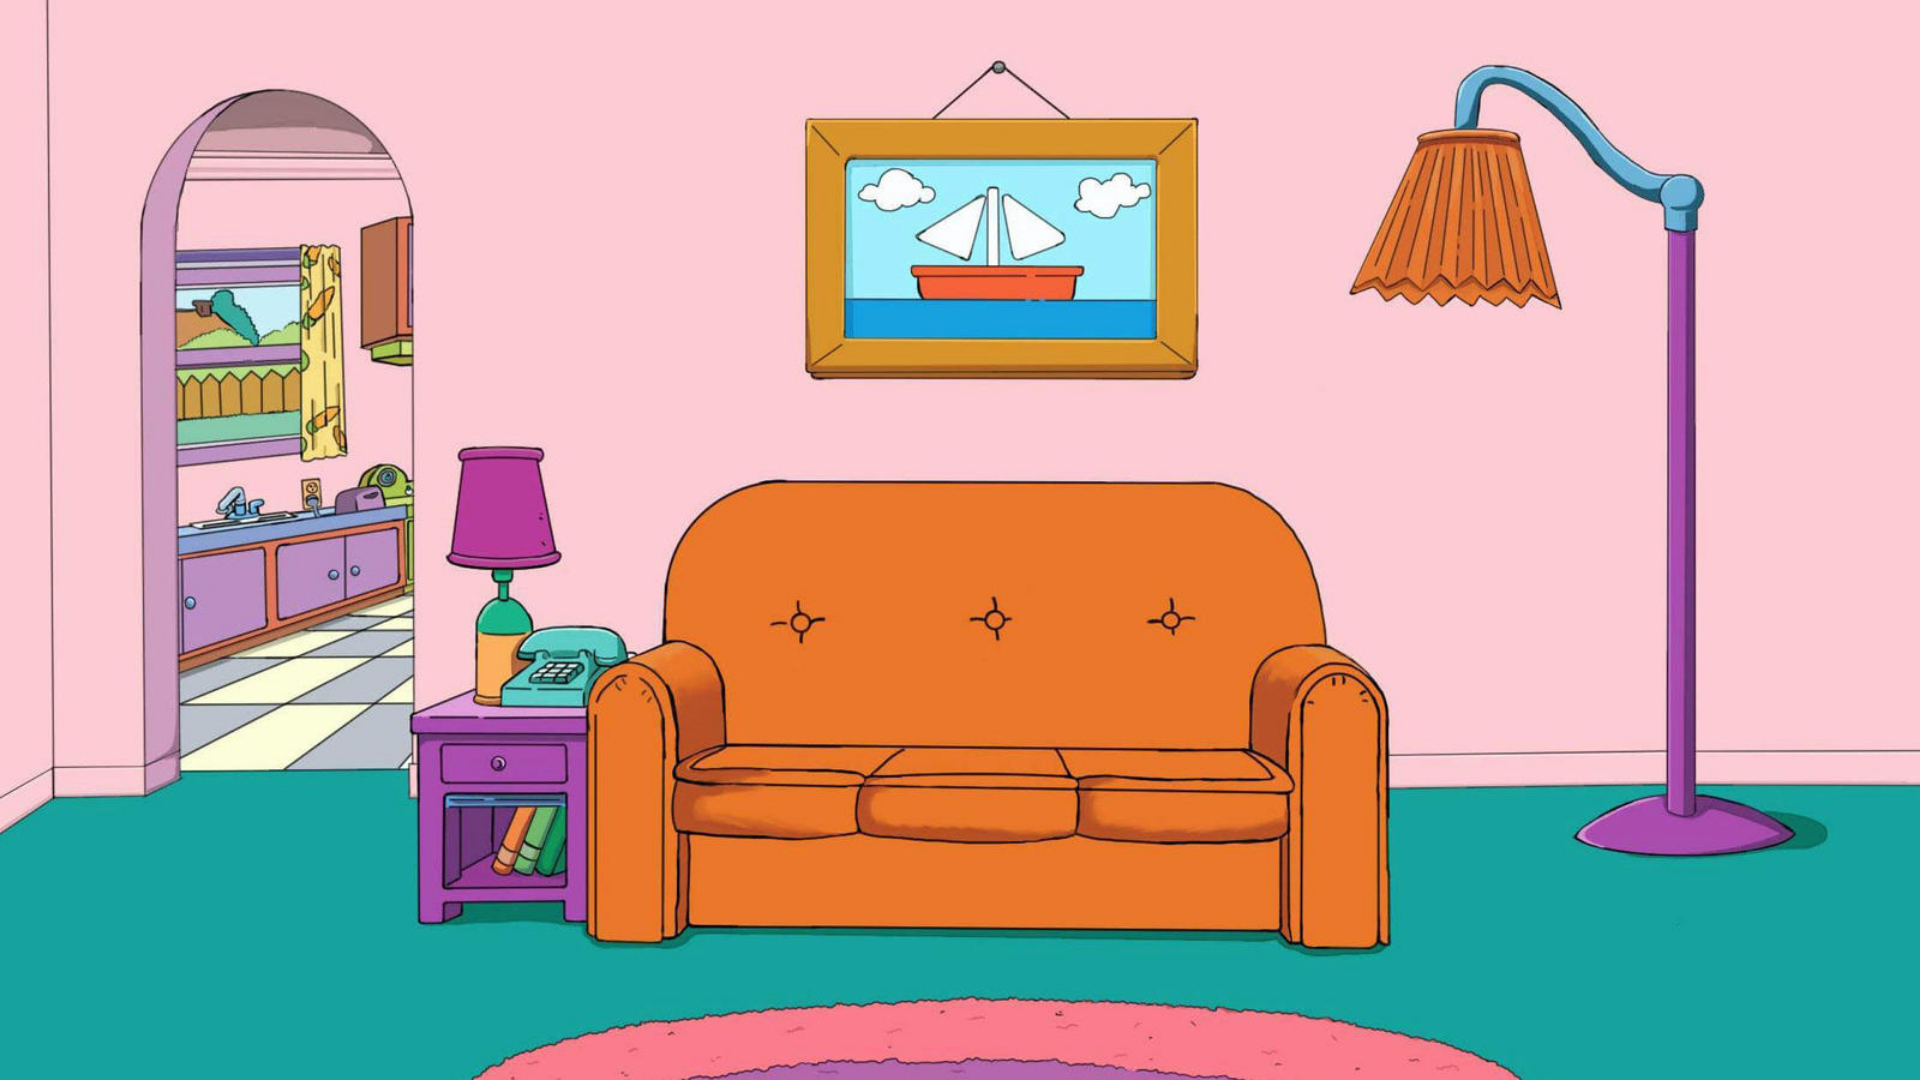 The Simpsons, Couch background for your Online Meetings